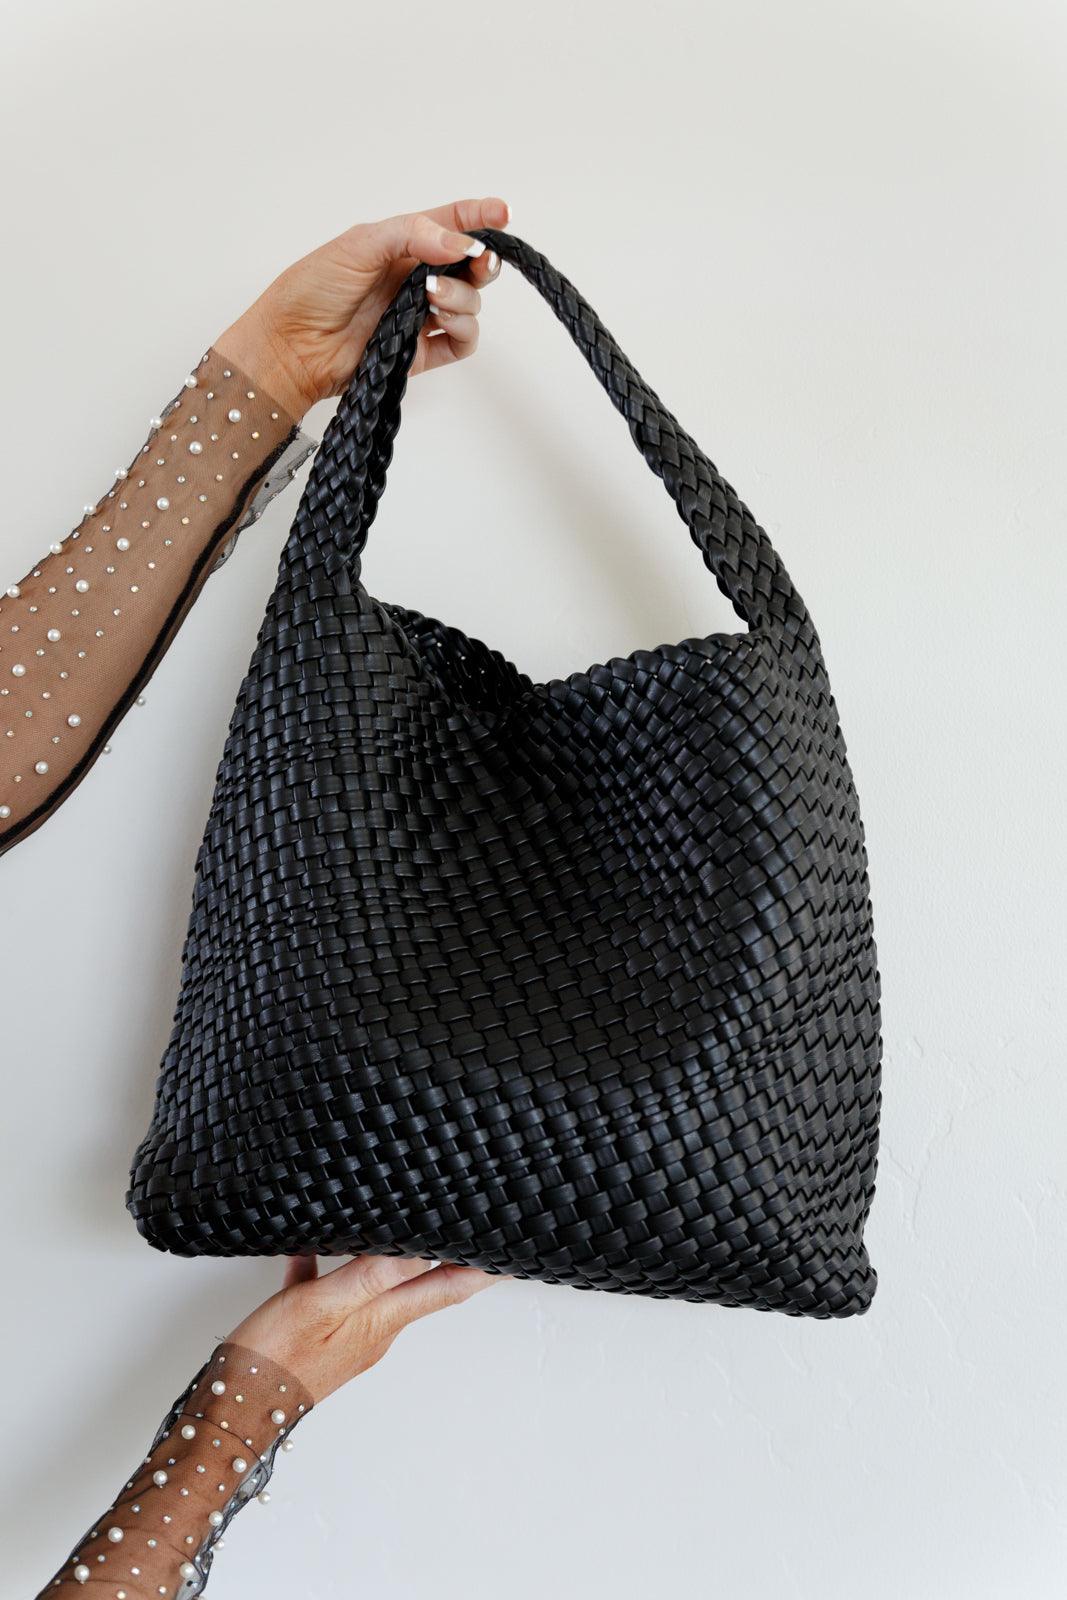 Woven and Worn Tote in Black - Happily Ever Atchison Shop Co.